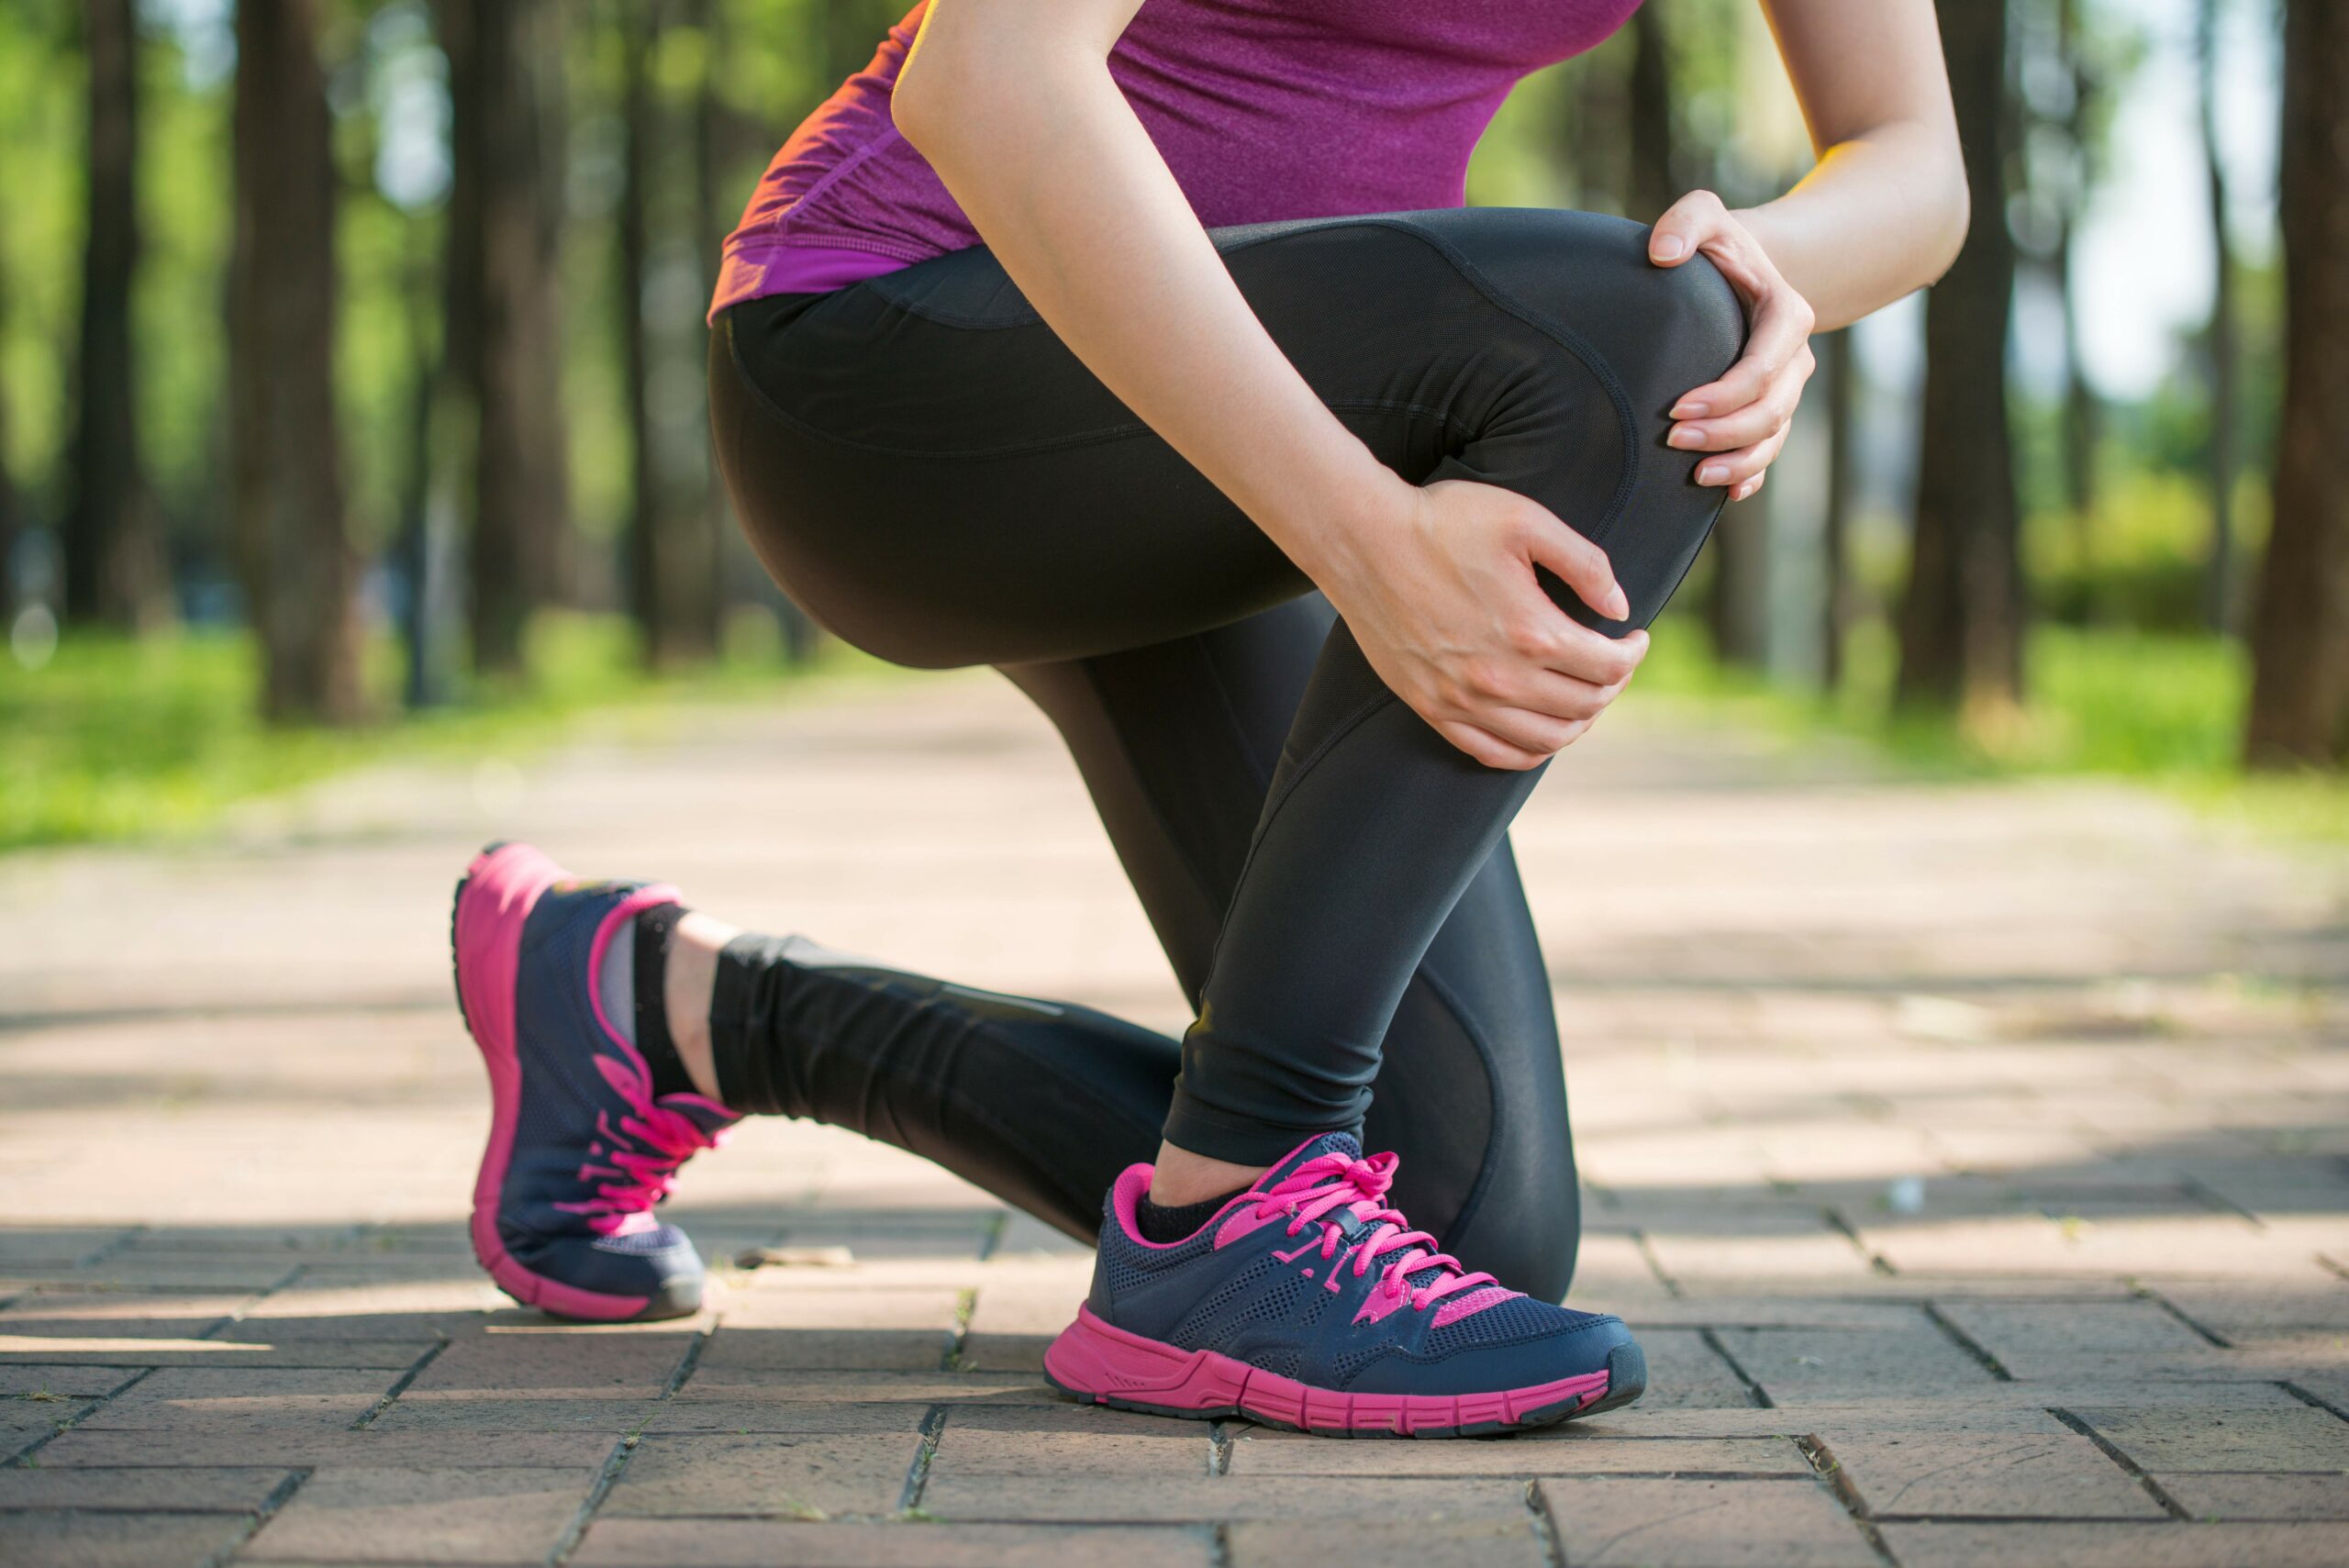 Woman Grabbing Knee in Pain While Jogging